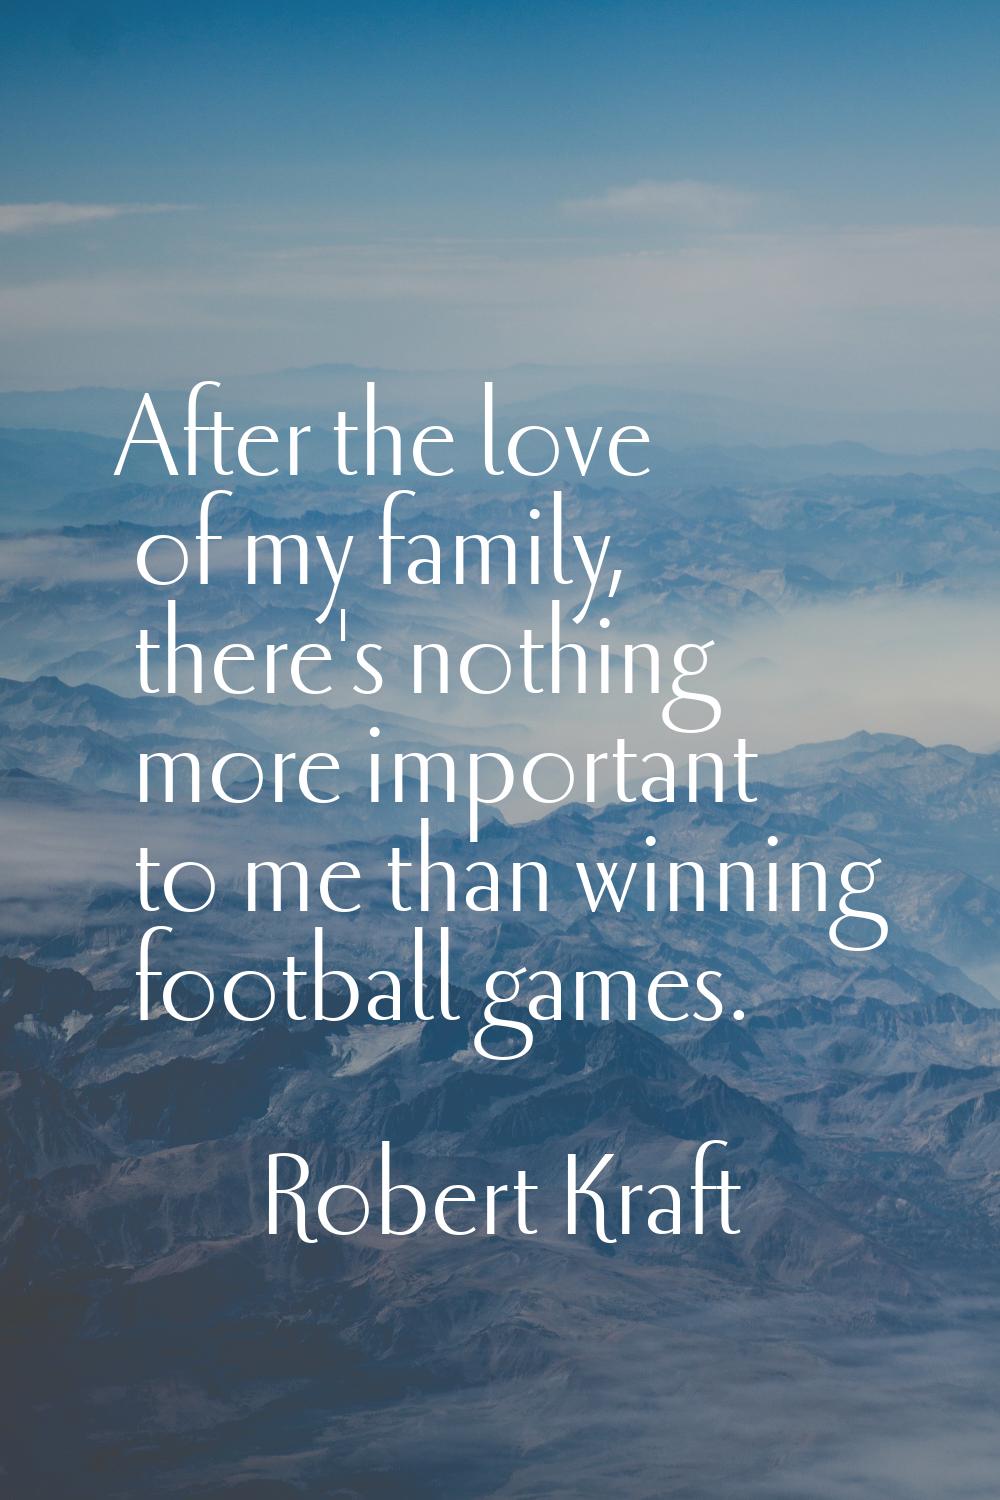 After the love of my family, there's nothing more important to me than winning football games.